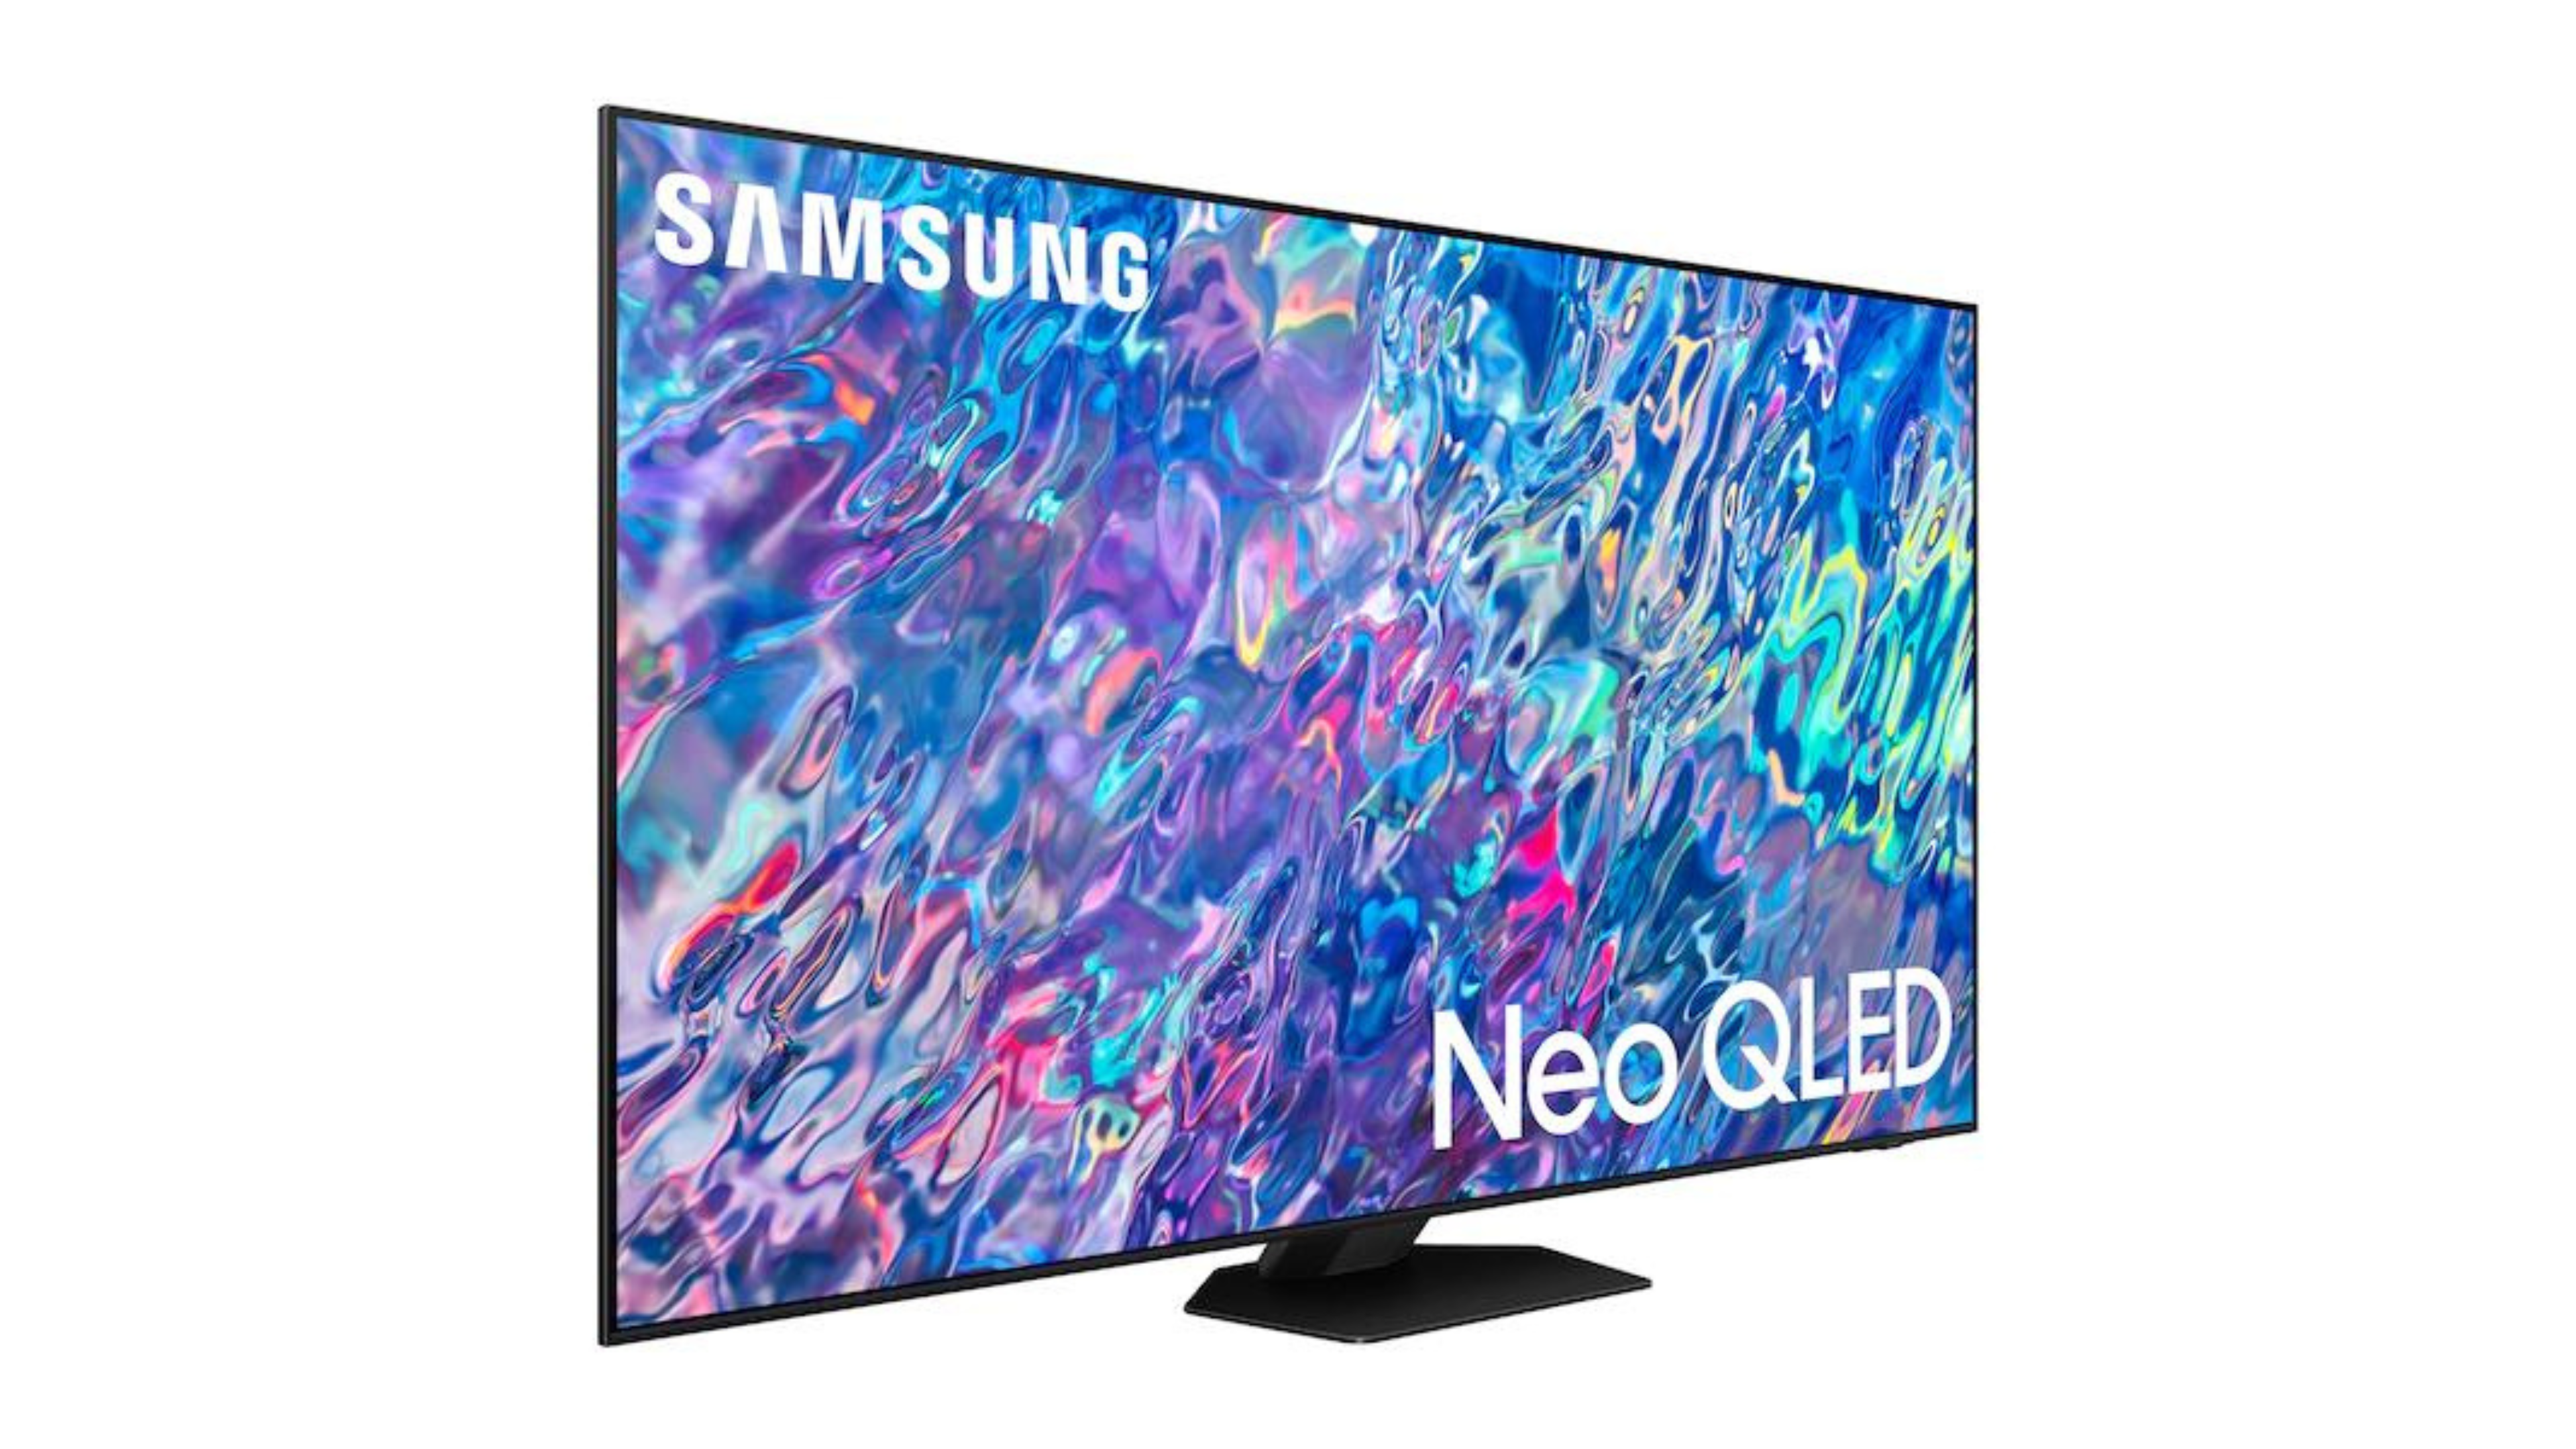 65” Class QN85B Samsung Neo QLED 4K Smart TV with strange colorful pattern on screen